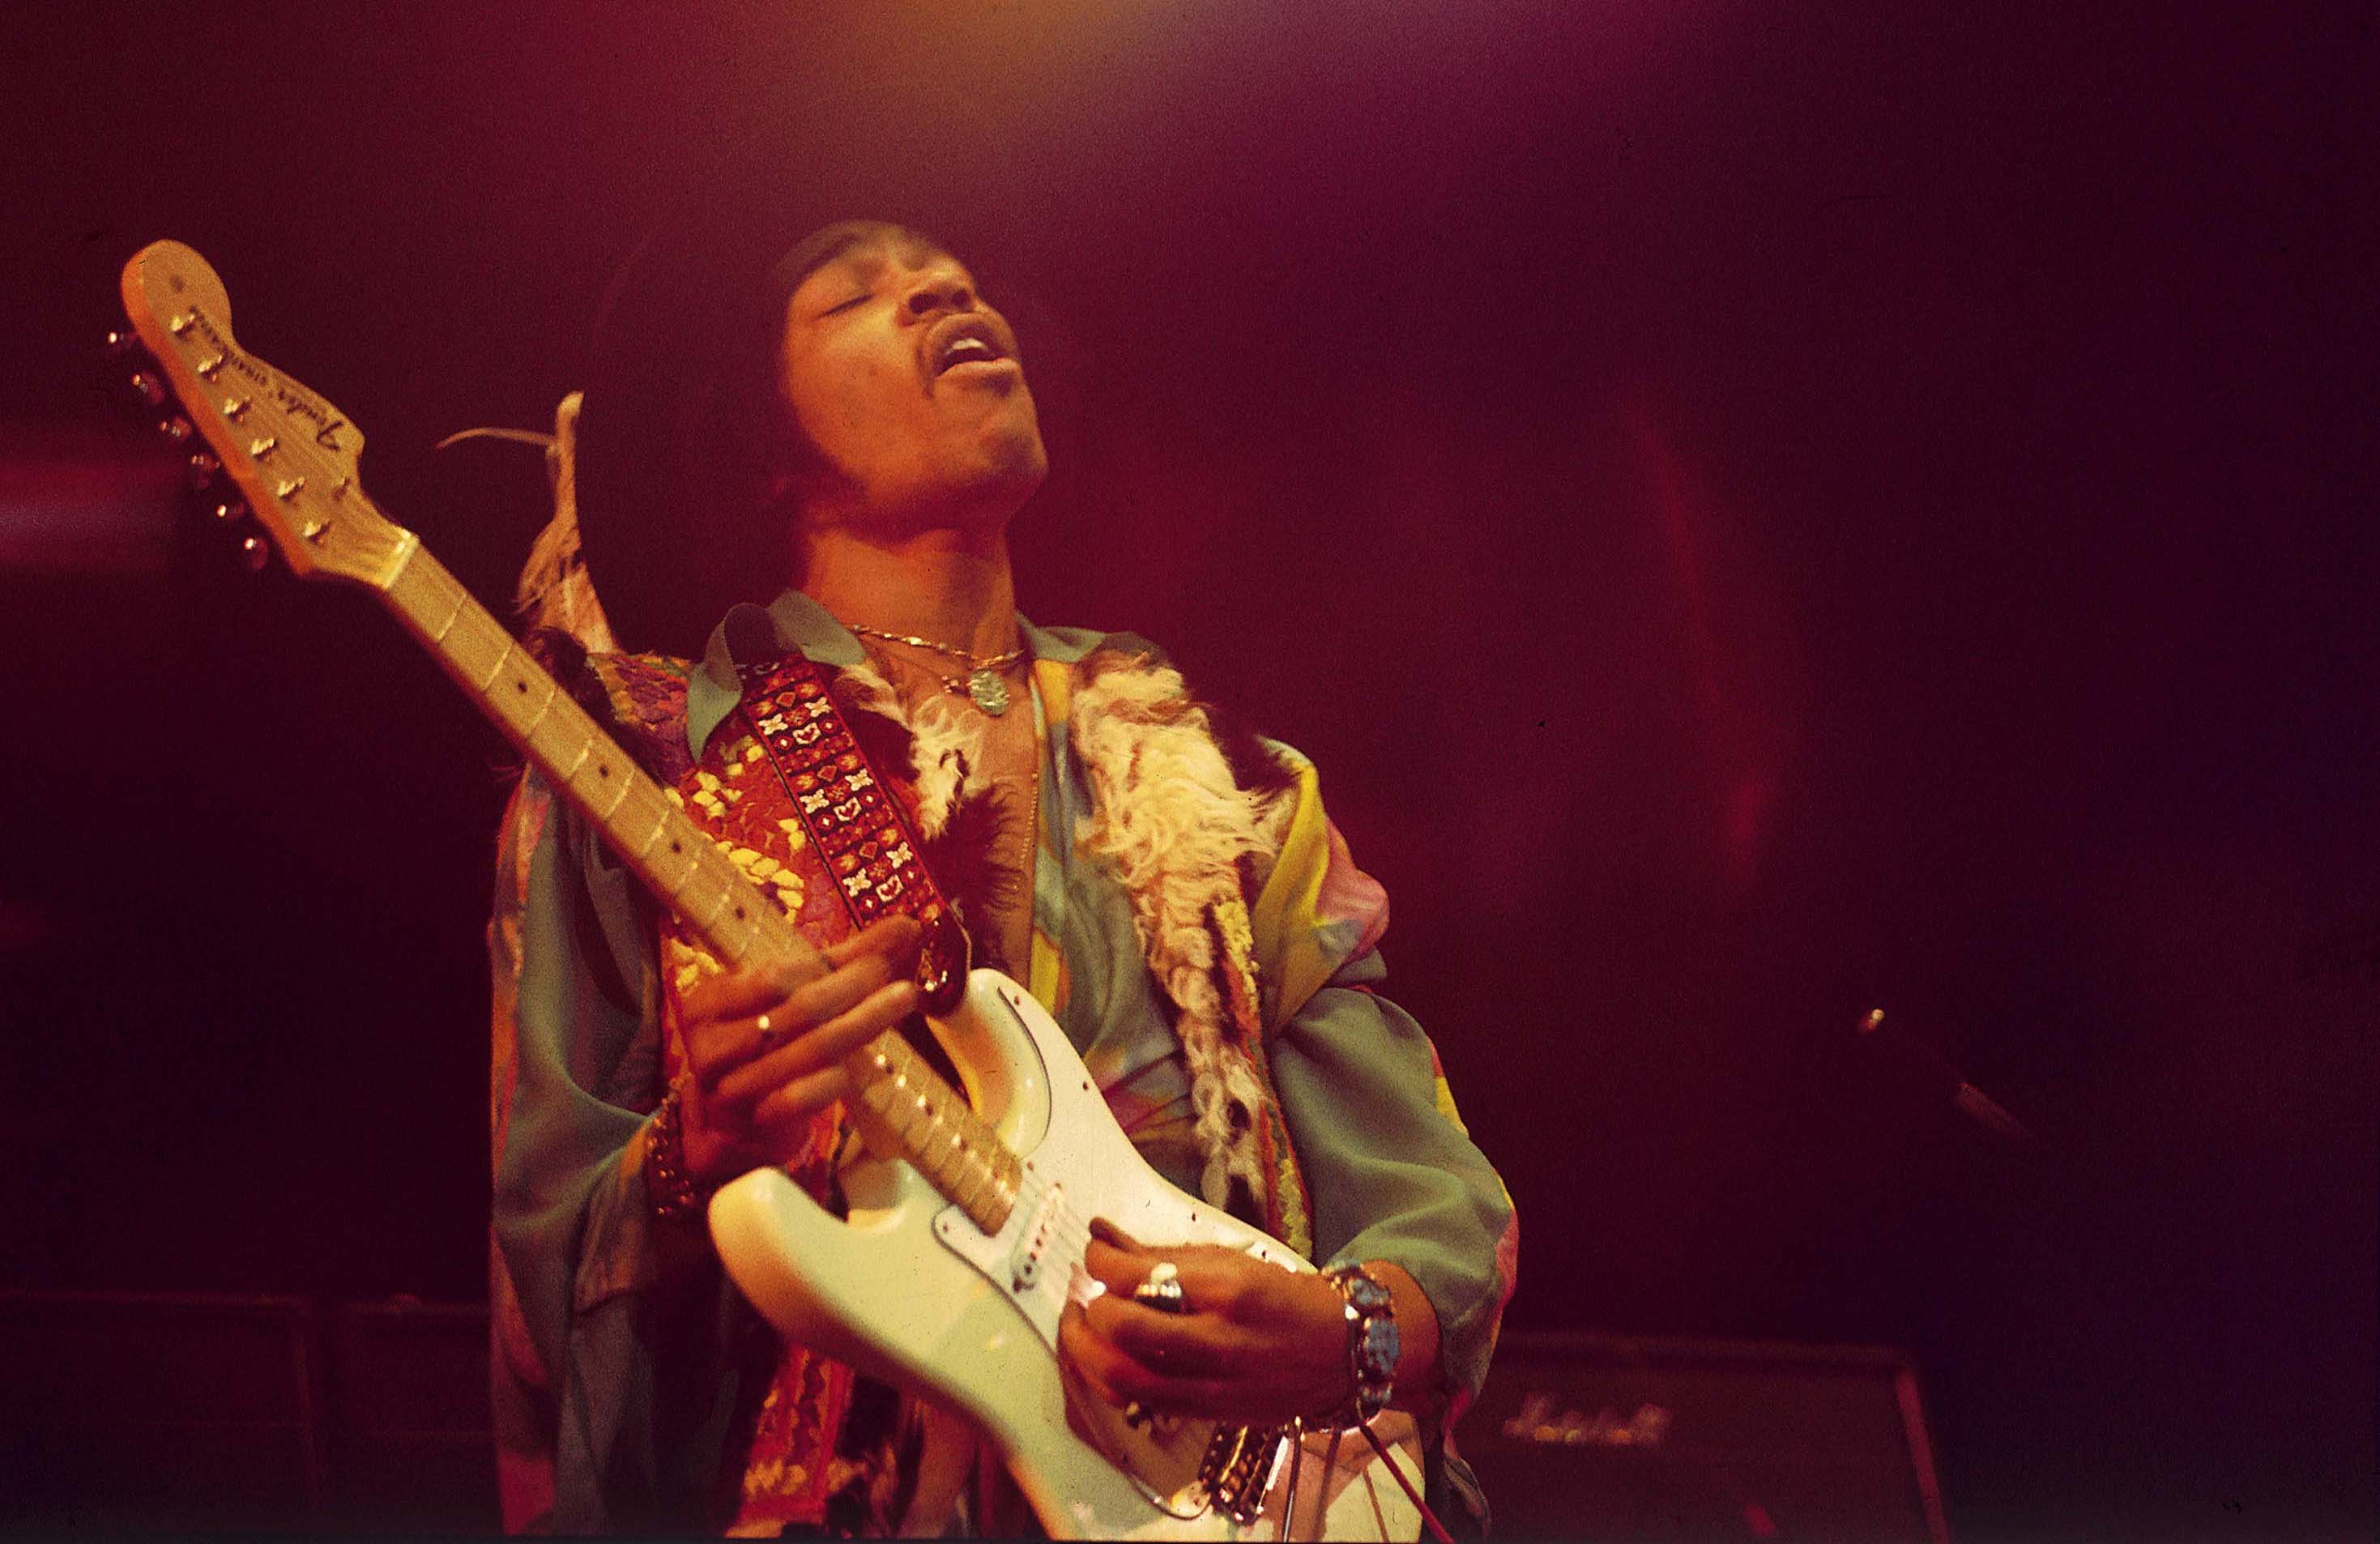 Jimi Hendrix, who had a long relationship with Little Richard, playing guitar